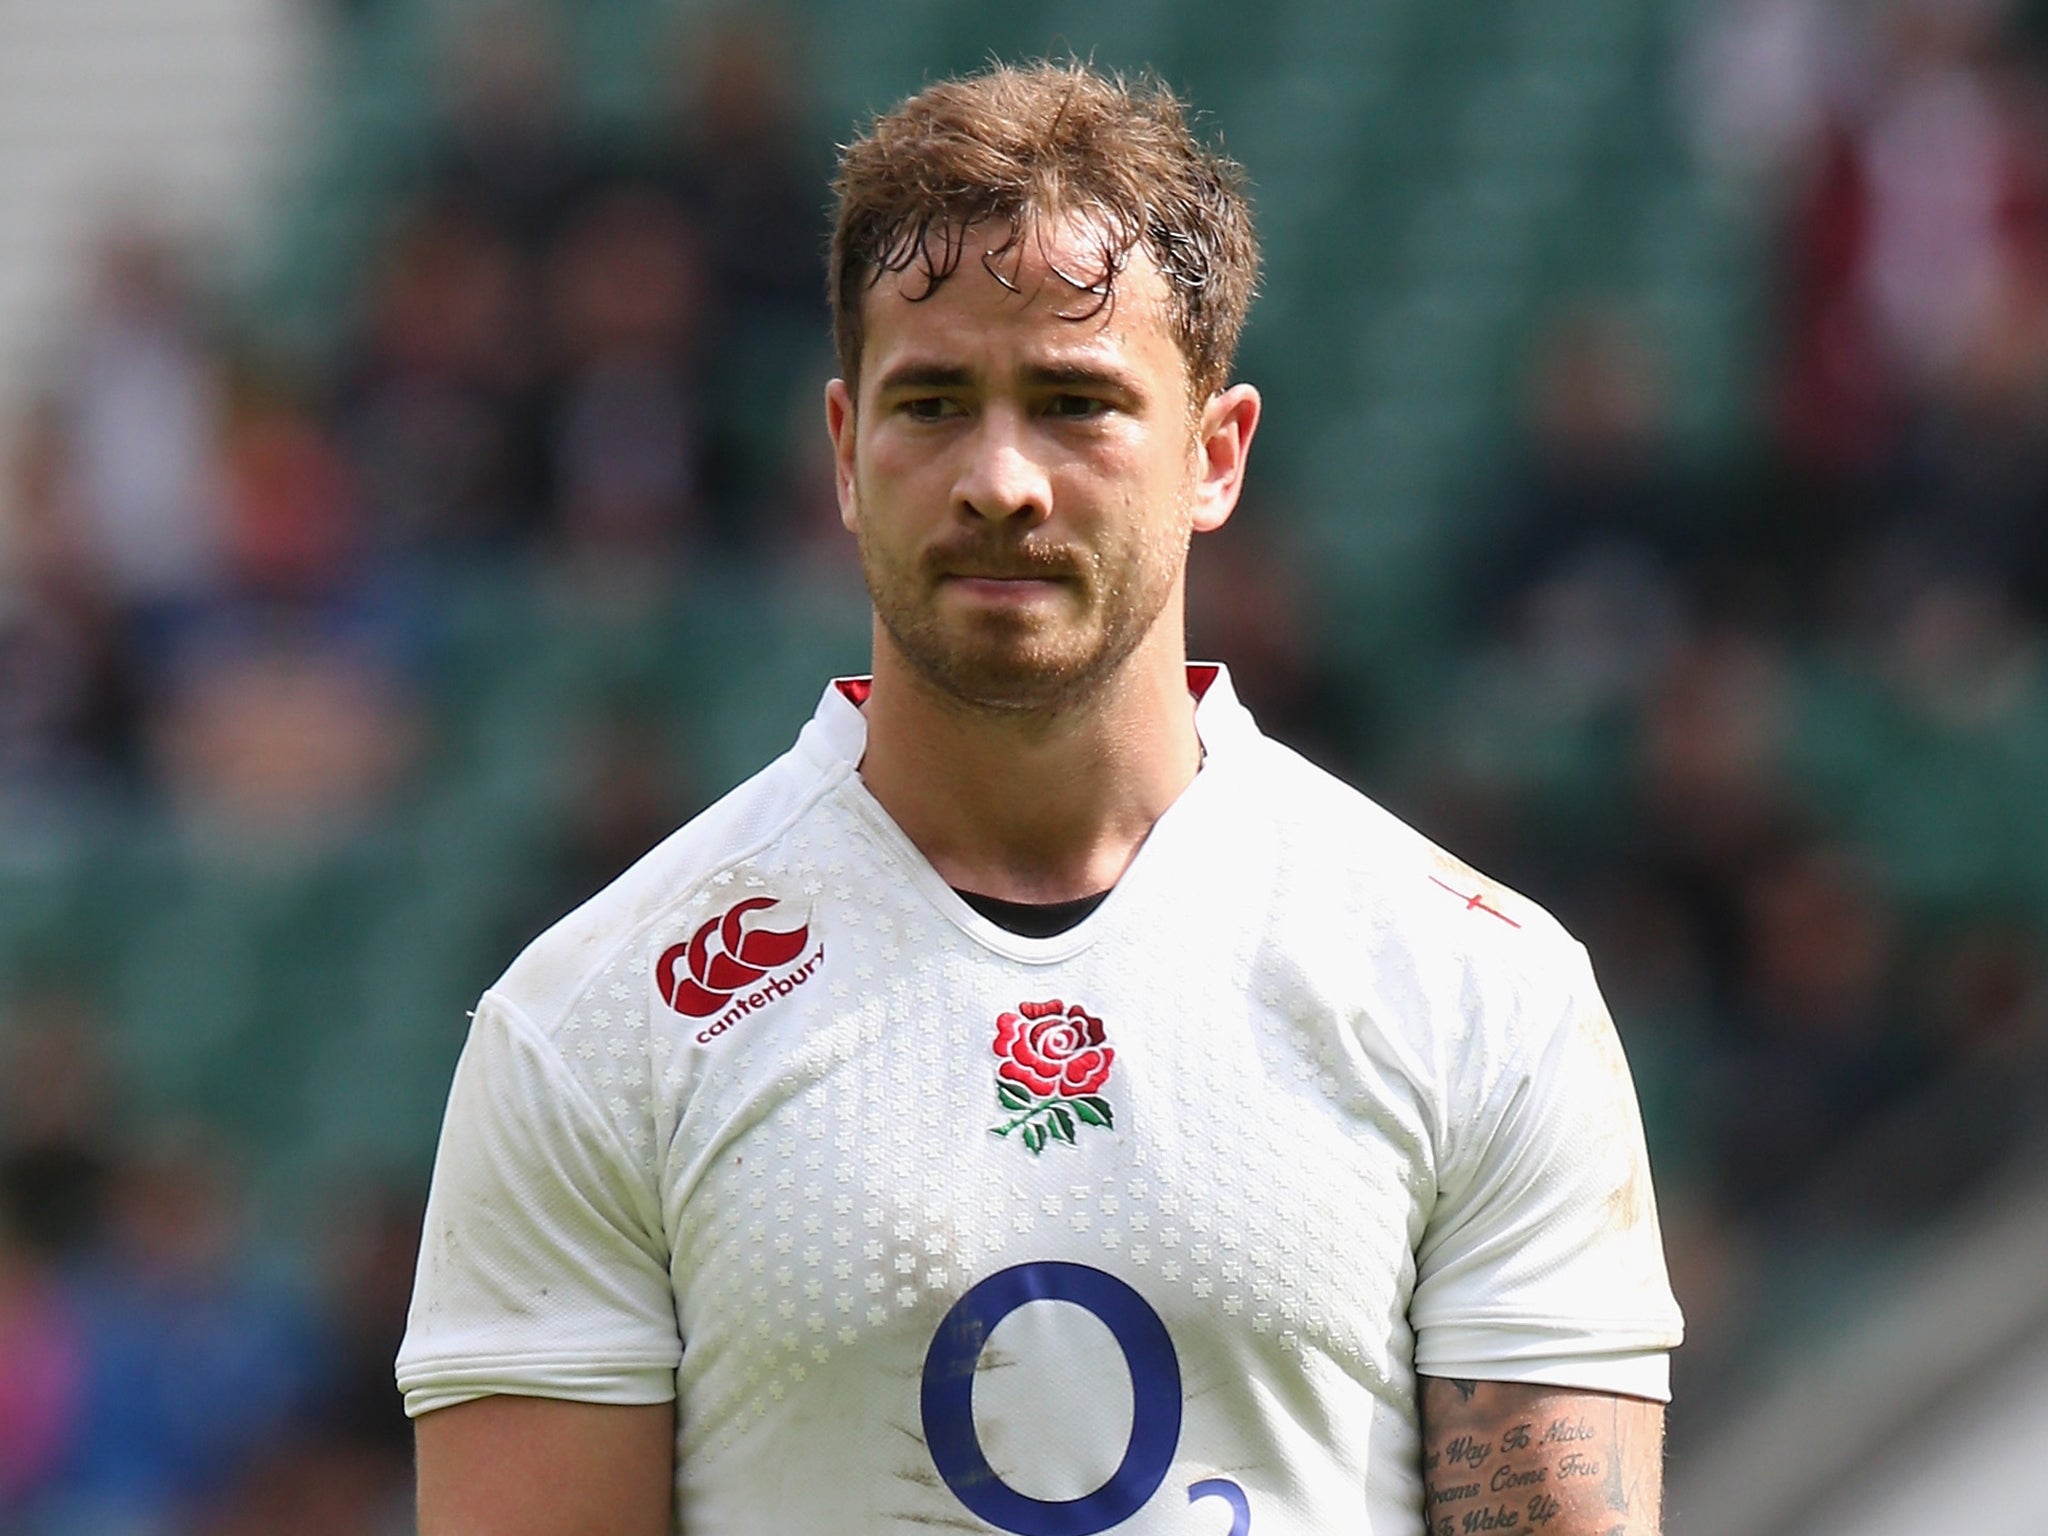 Danny Cipriani will not be featuring for England at the World Cup